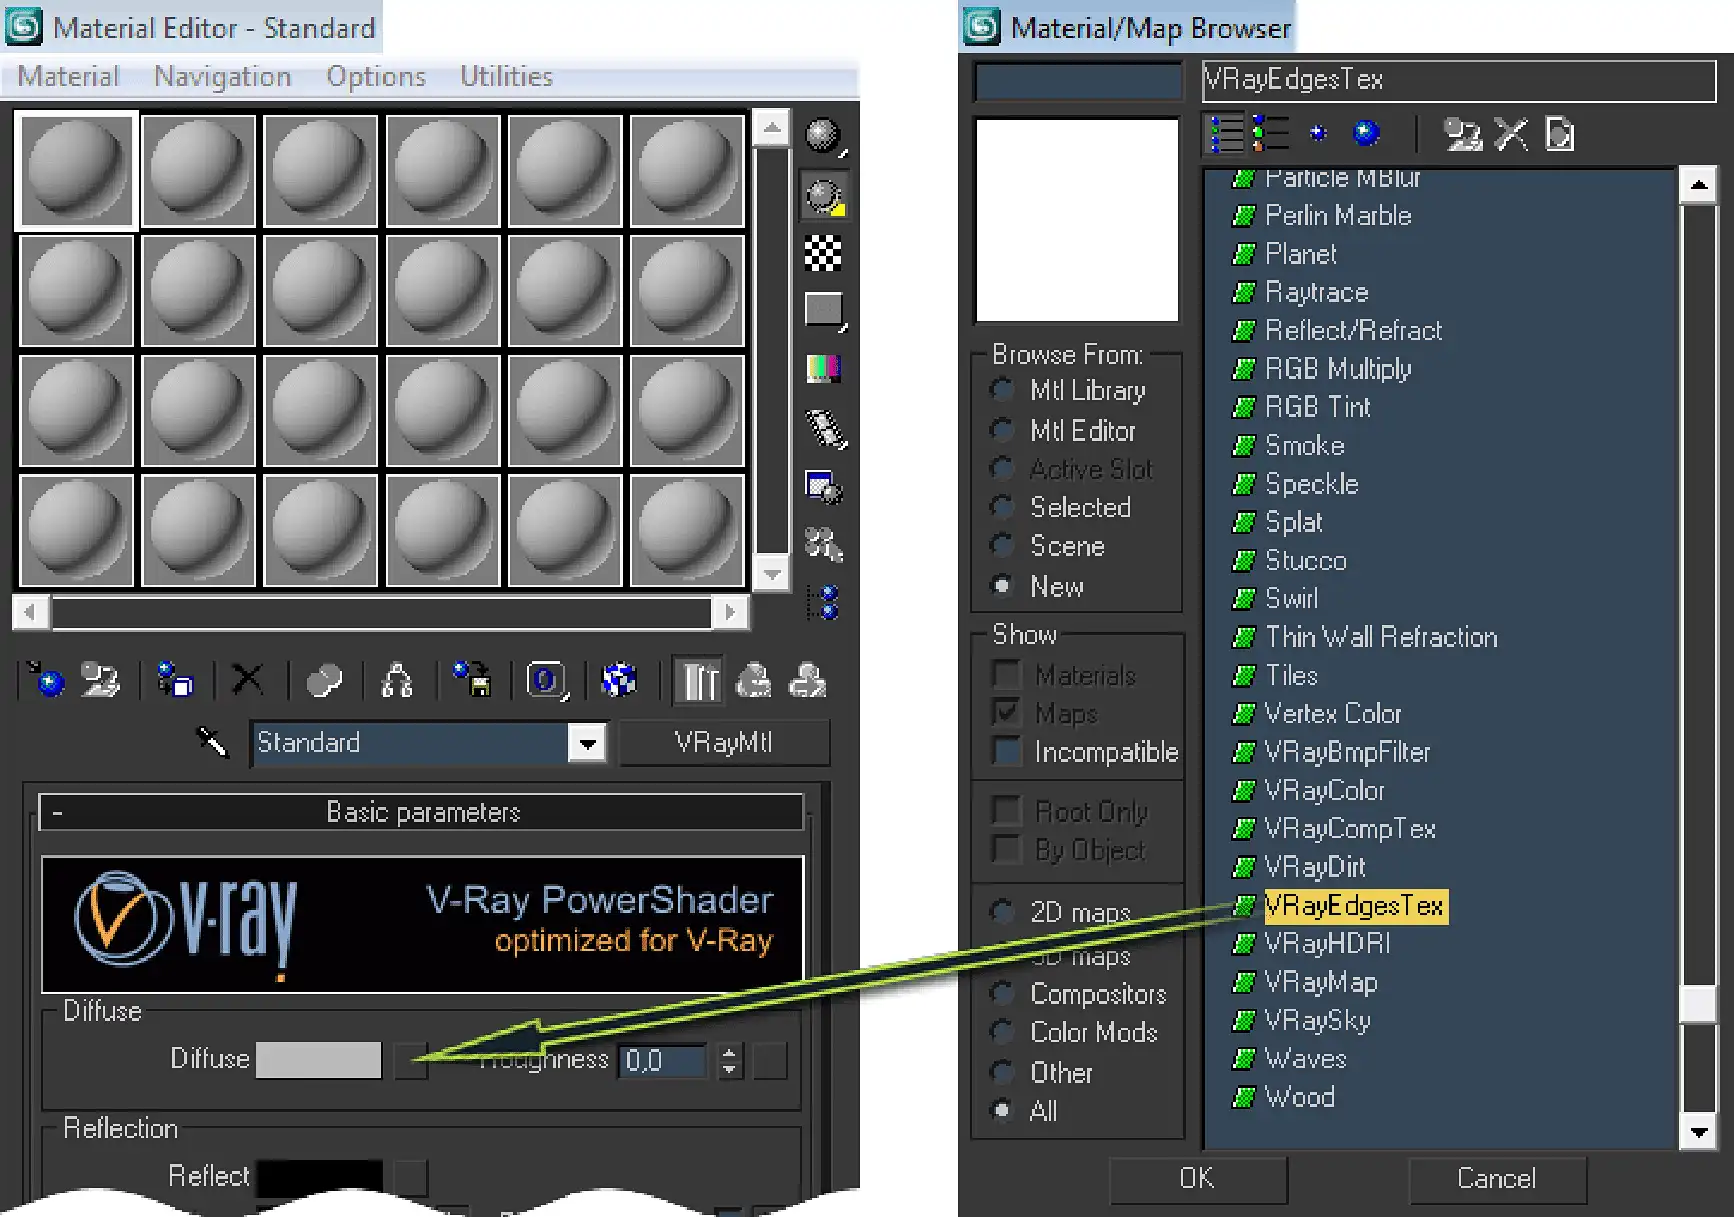 Scheme explaining how to create wireframe material in 3ds max and V-Ray based on VRayMtl material and VRayEdgesText texture.